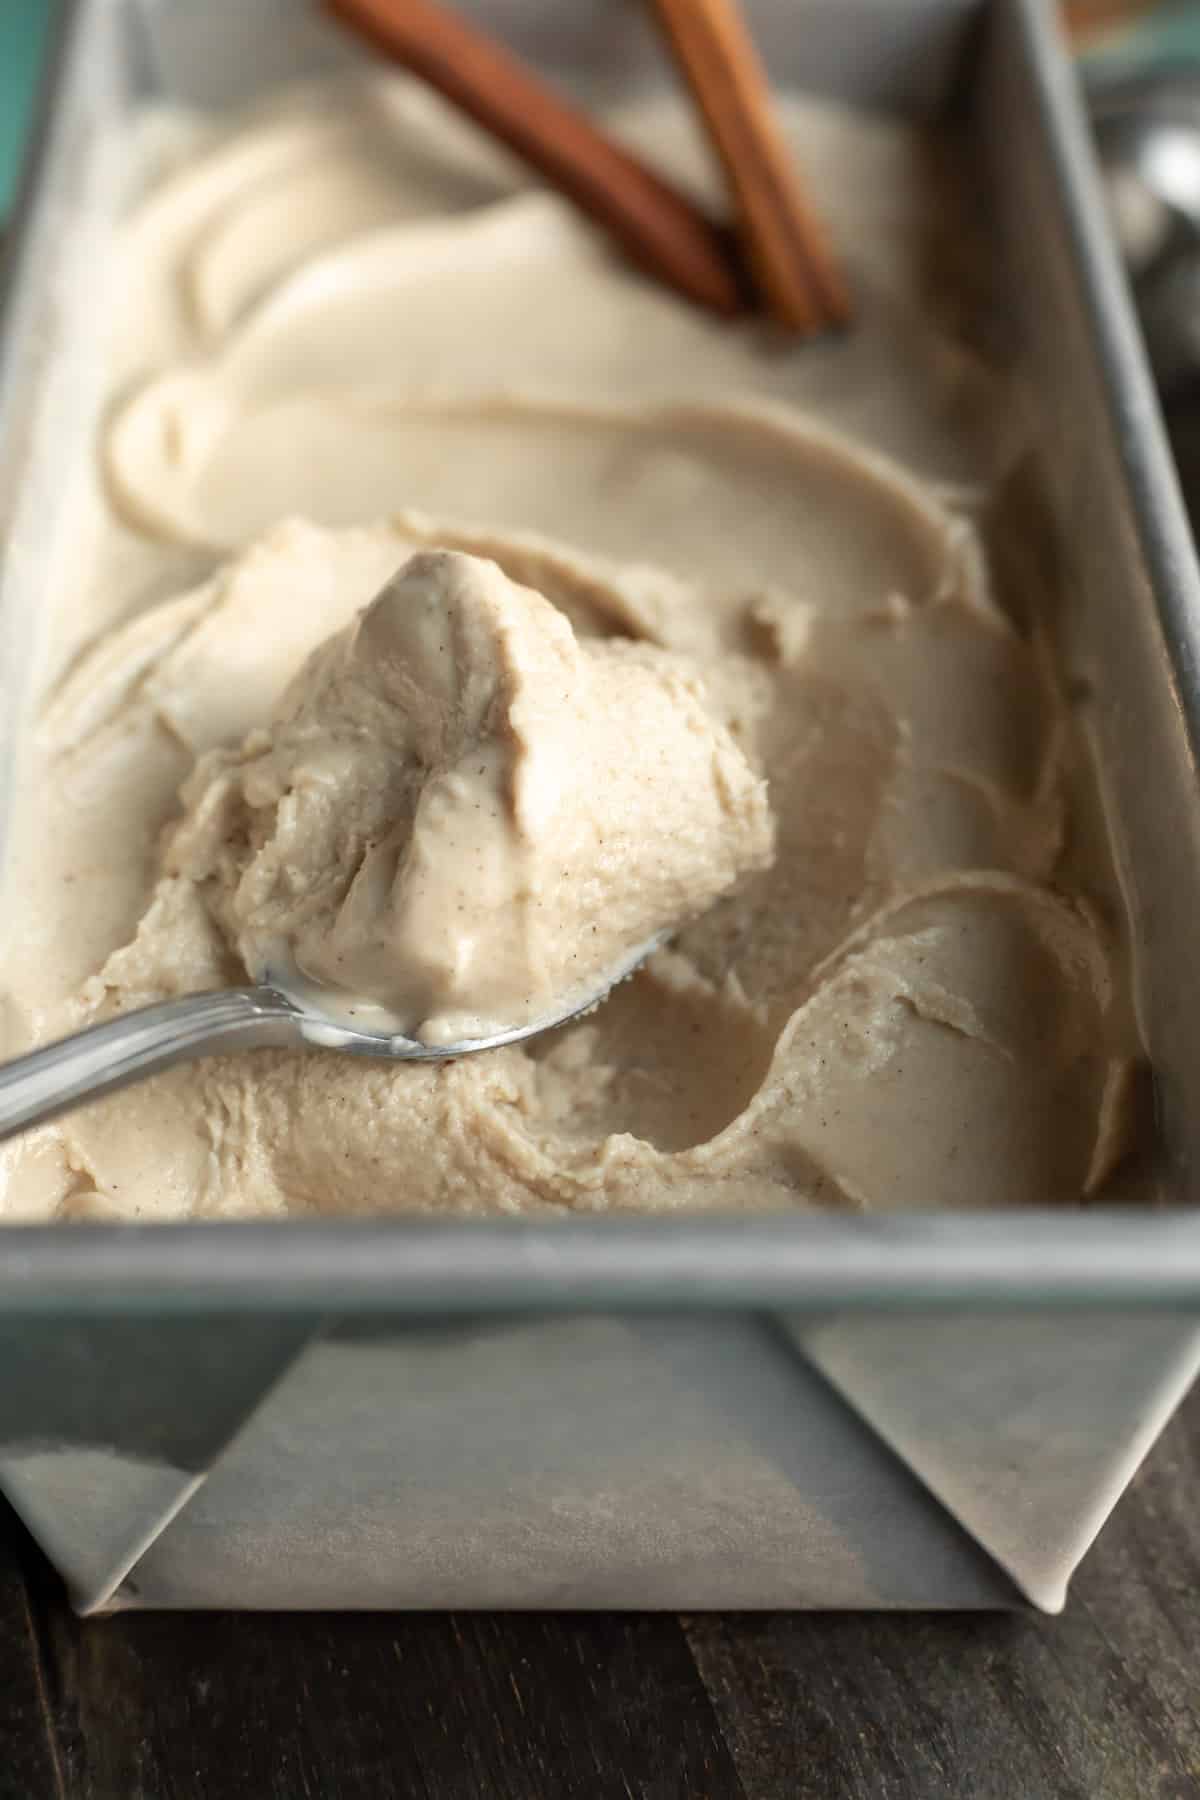 A spoon scooping up creamy vegan ice cream from a metal loaf pan.